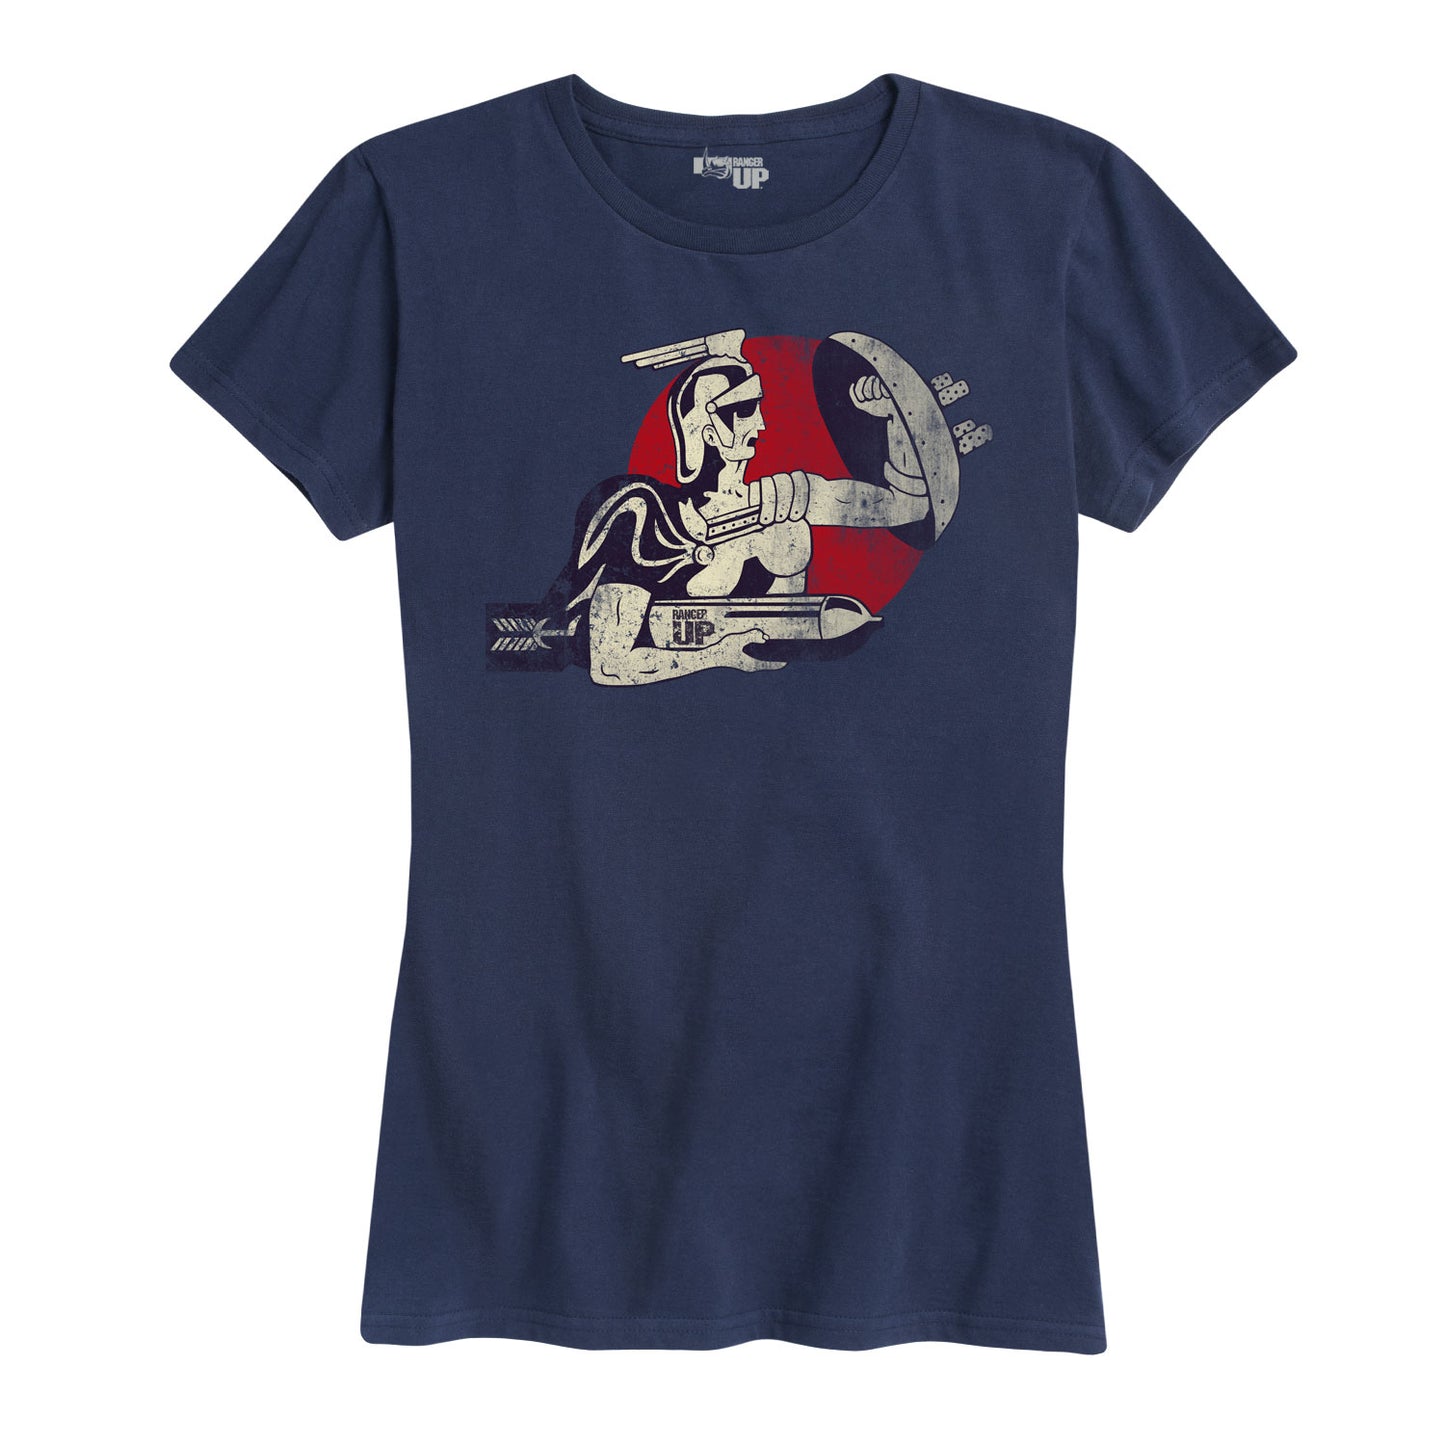 Women's 641st Fighter Squadron Tee